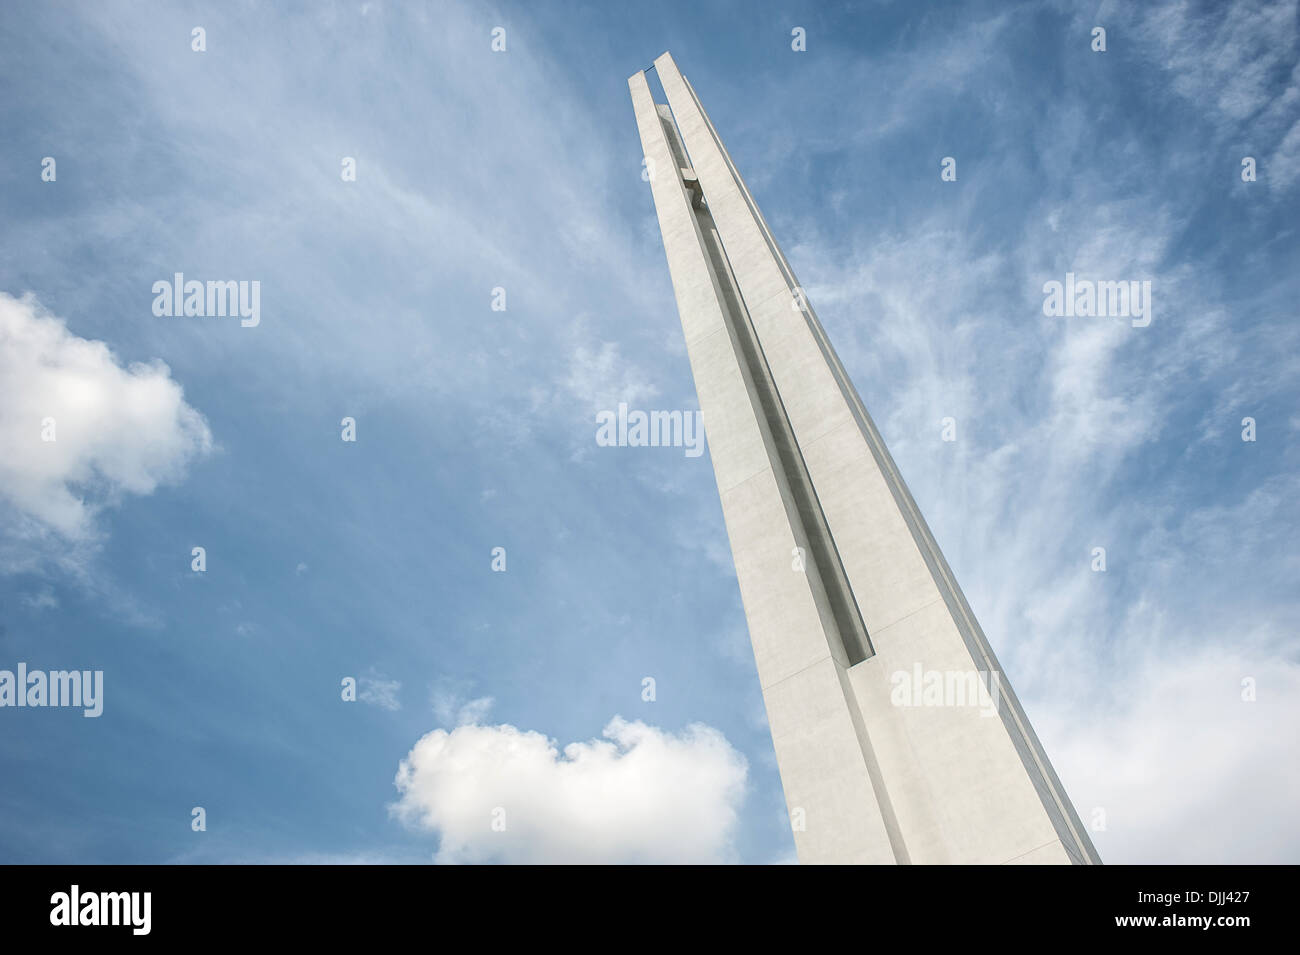 The Memorial to the Civilian Victims of the Japanese Occupation Stock Photo